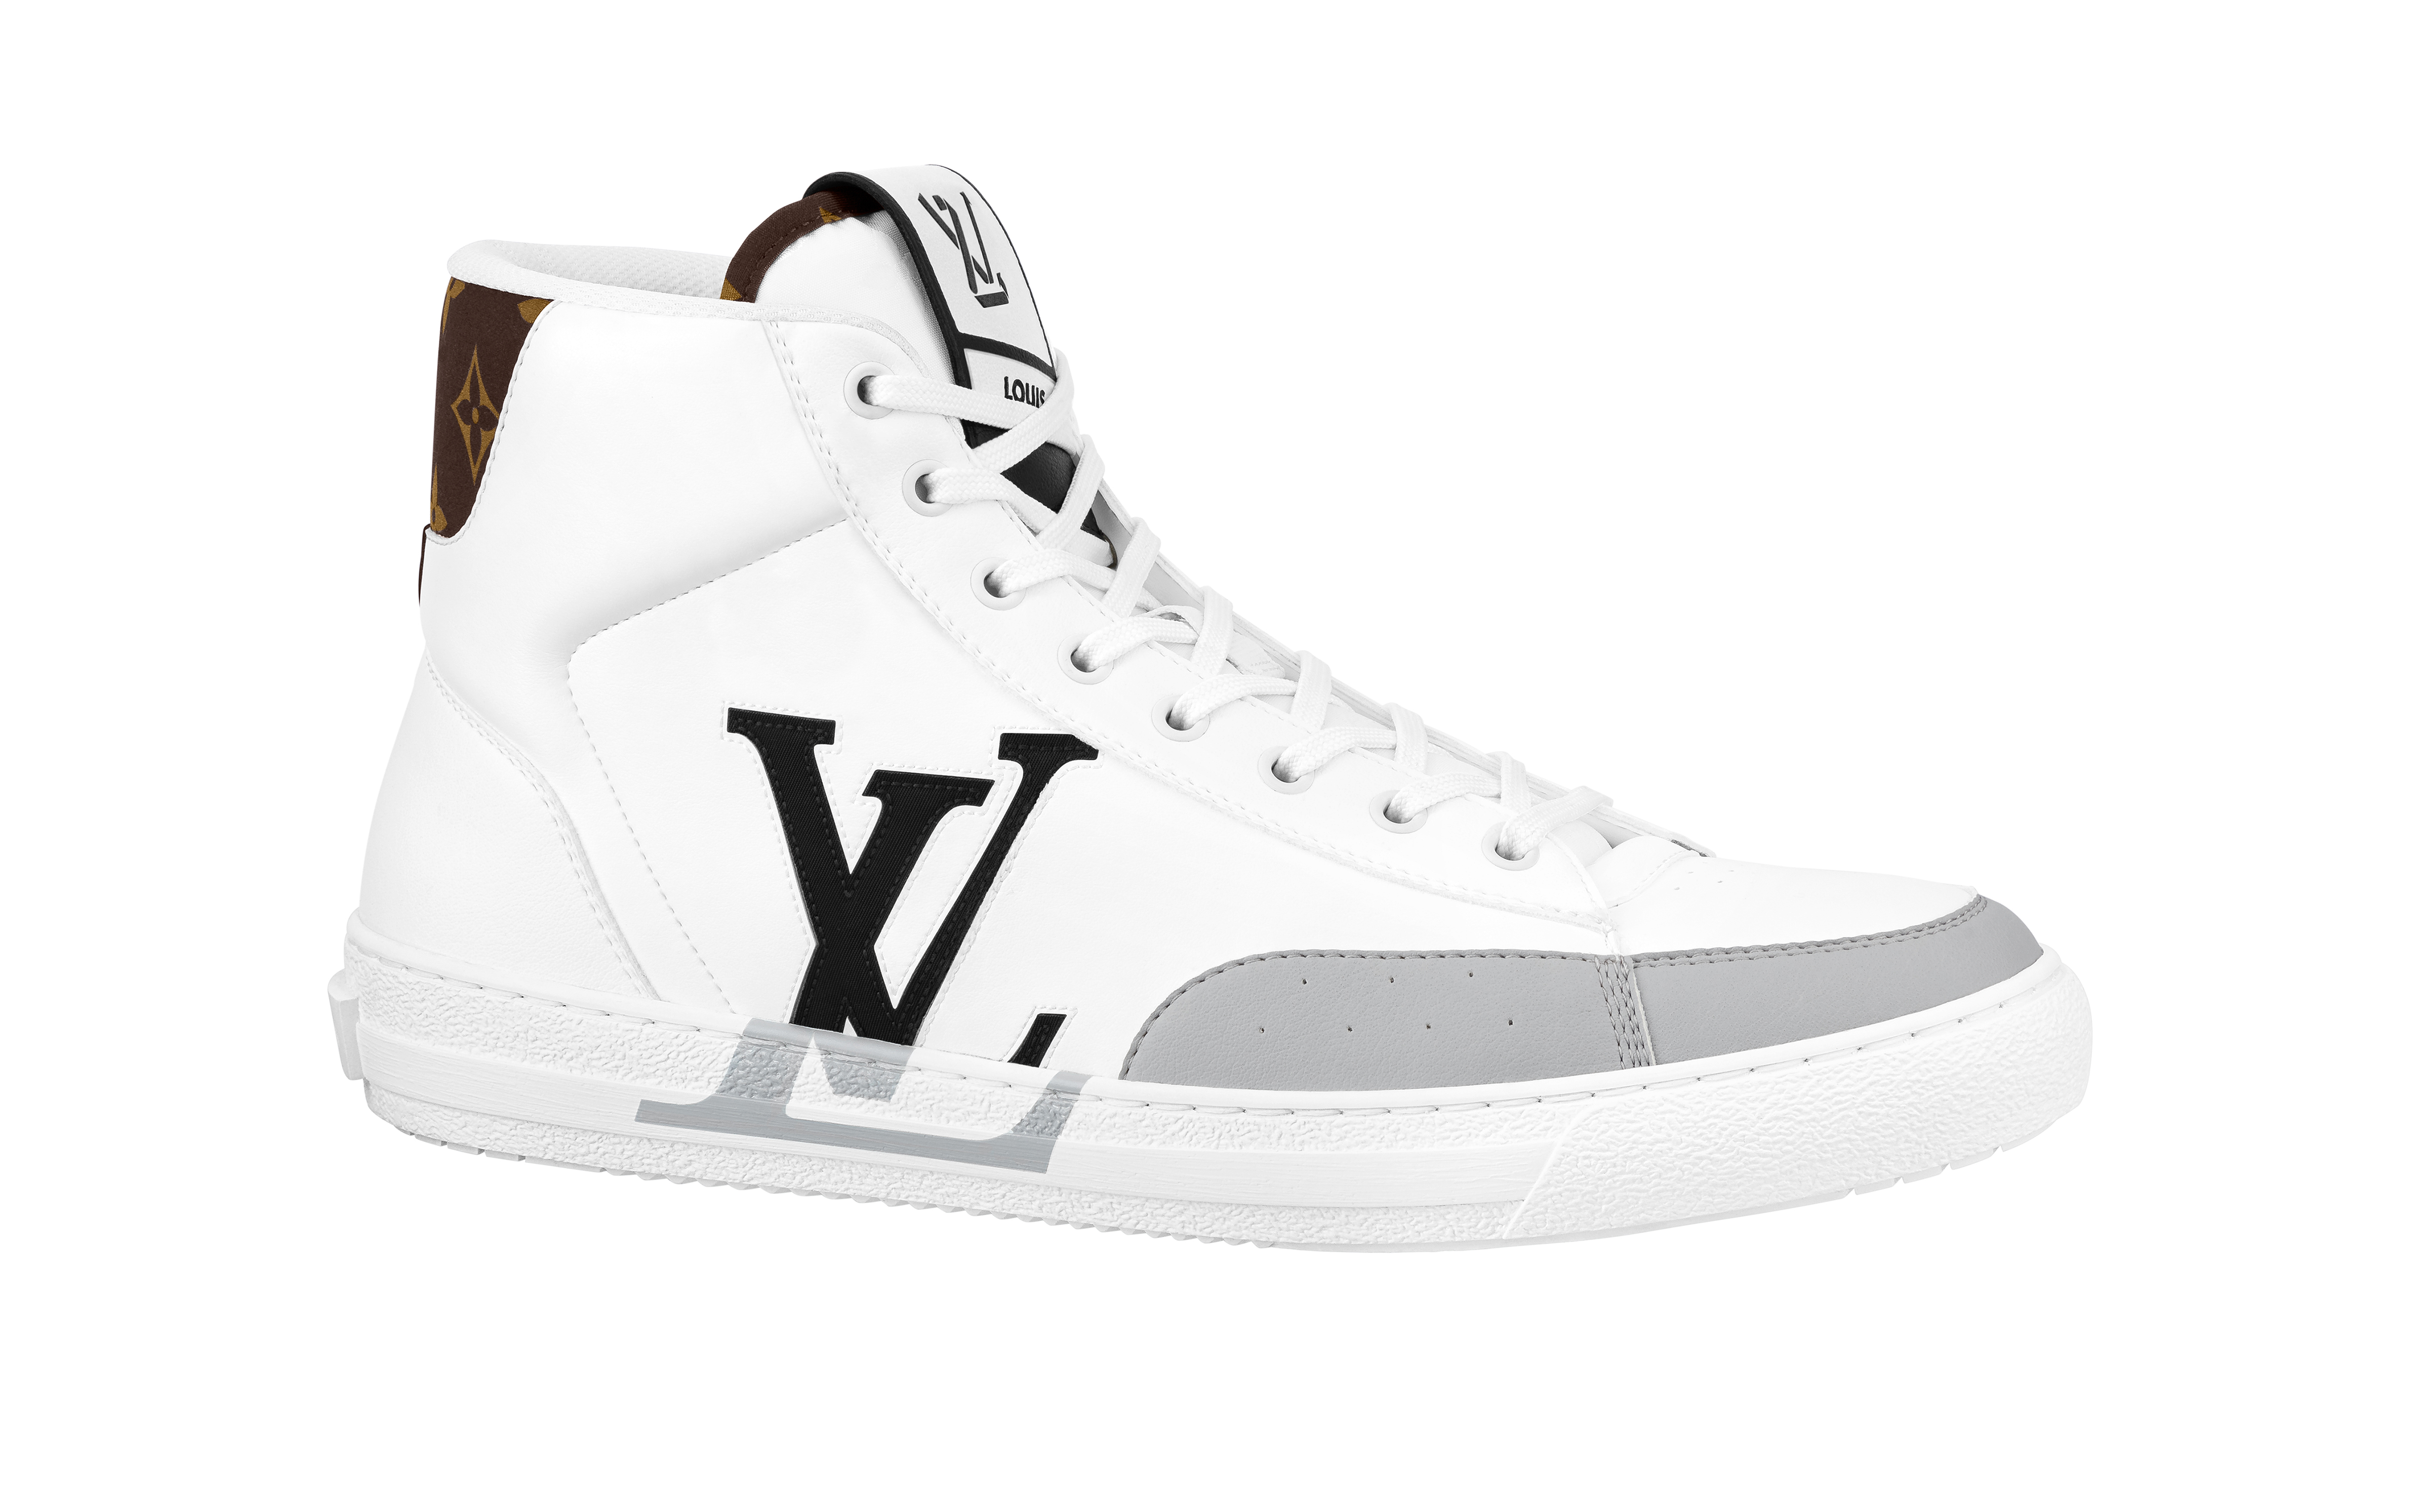 Louis Vuitton Reveals New Sustainable LV Trainer